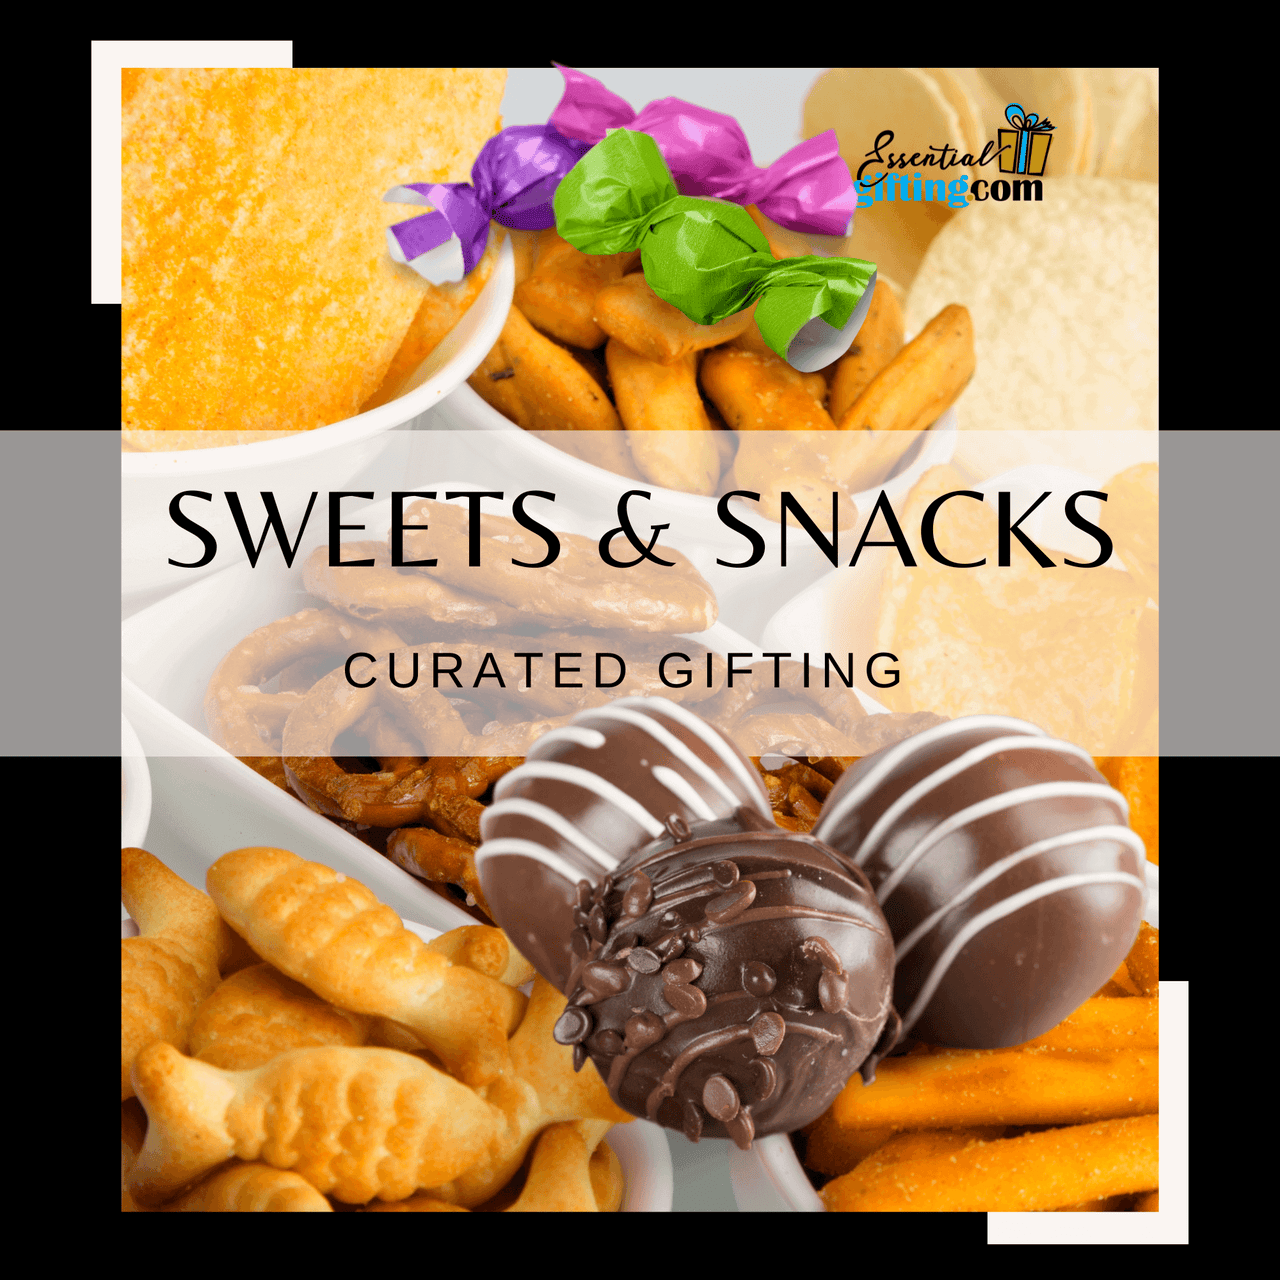 Assortment of sweet and savory snacks in a curated gift box from Essentialgifting.